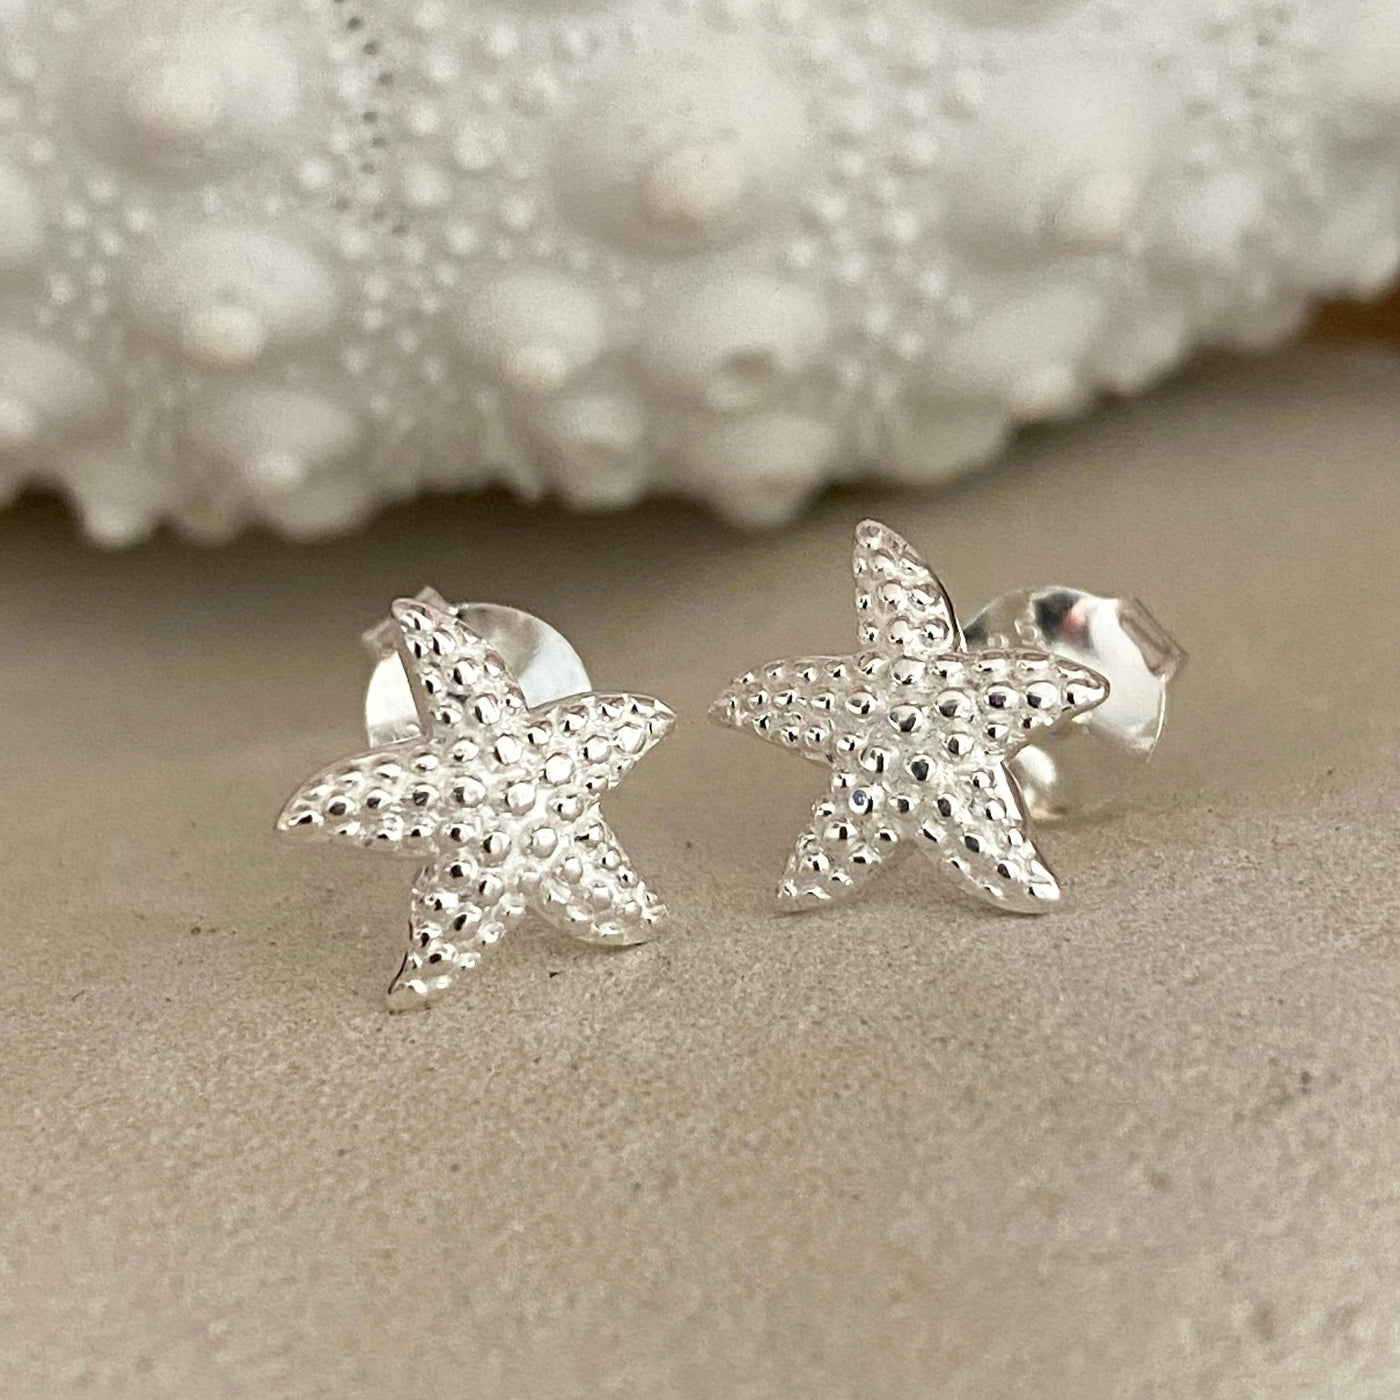 Stud Earrings 'Starfish' Gold | The Courthouse Collection